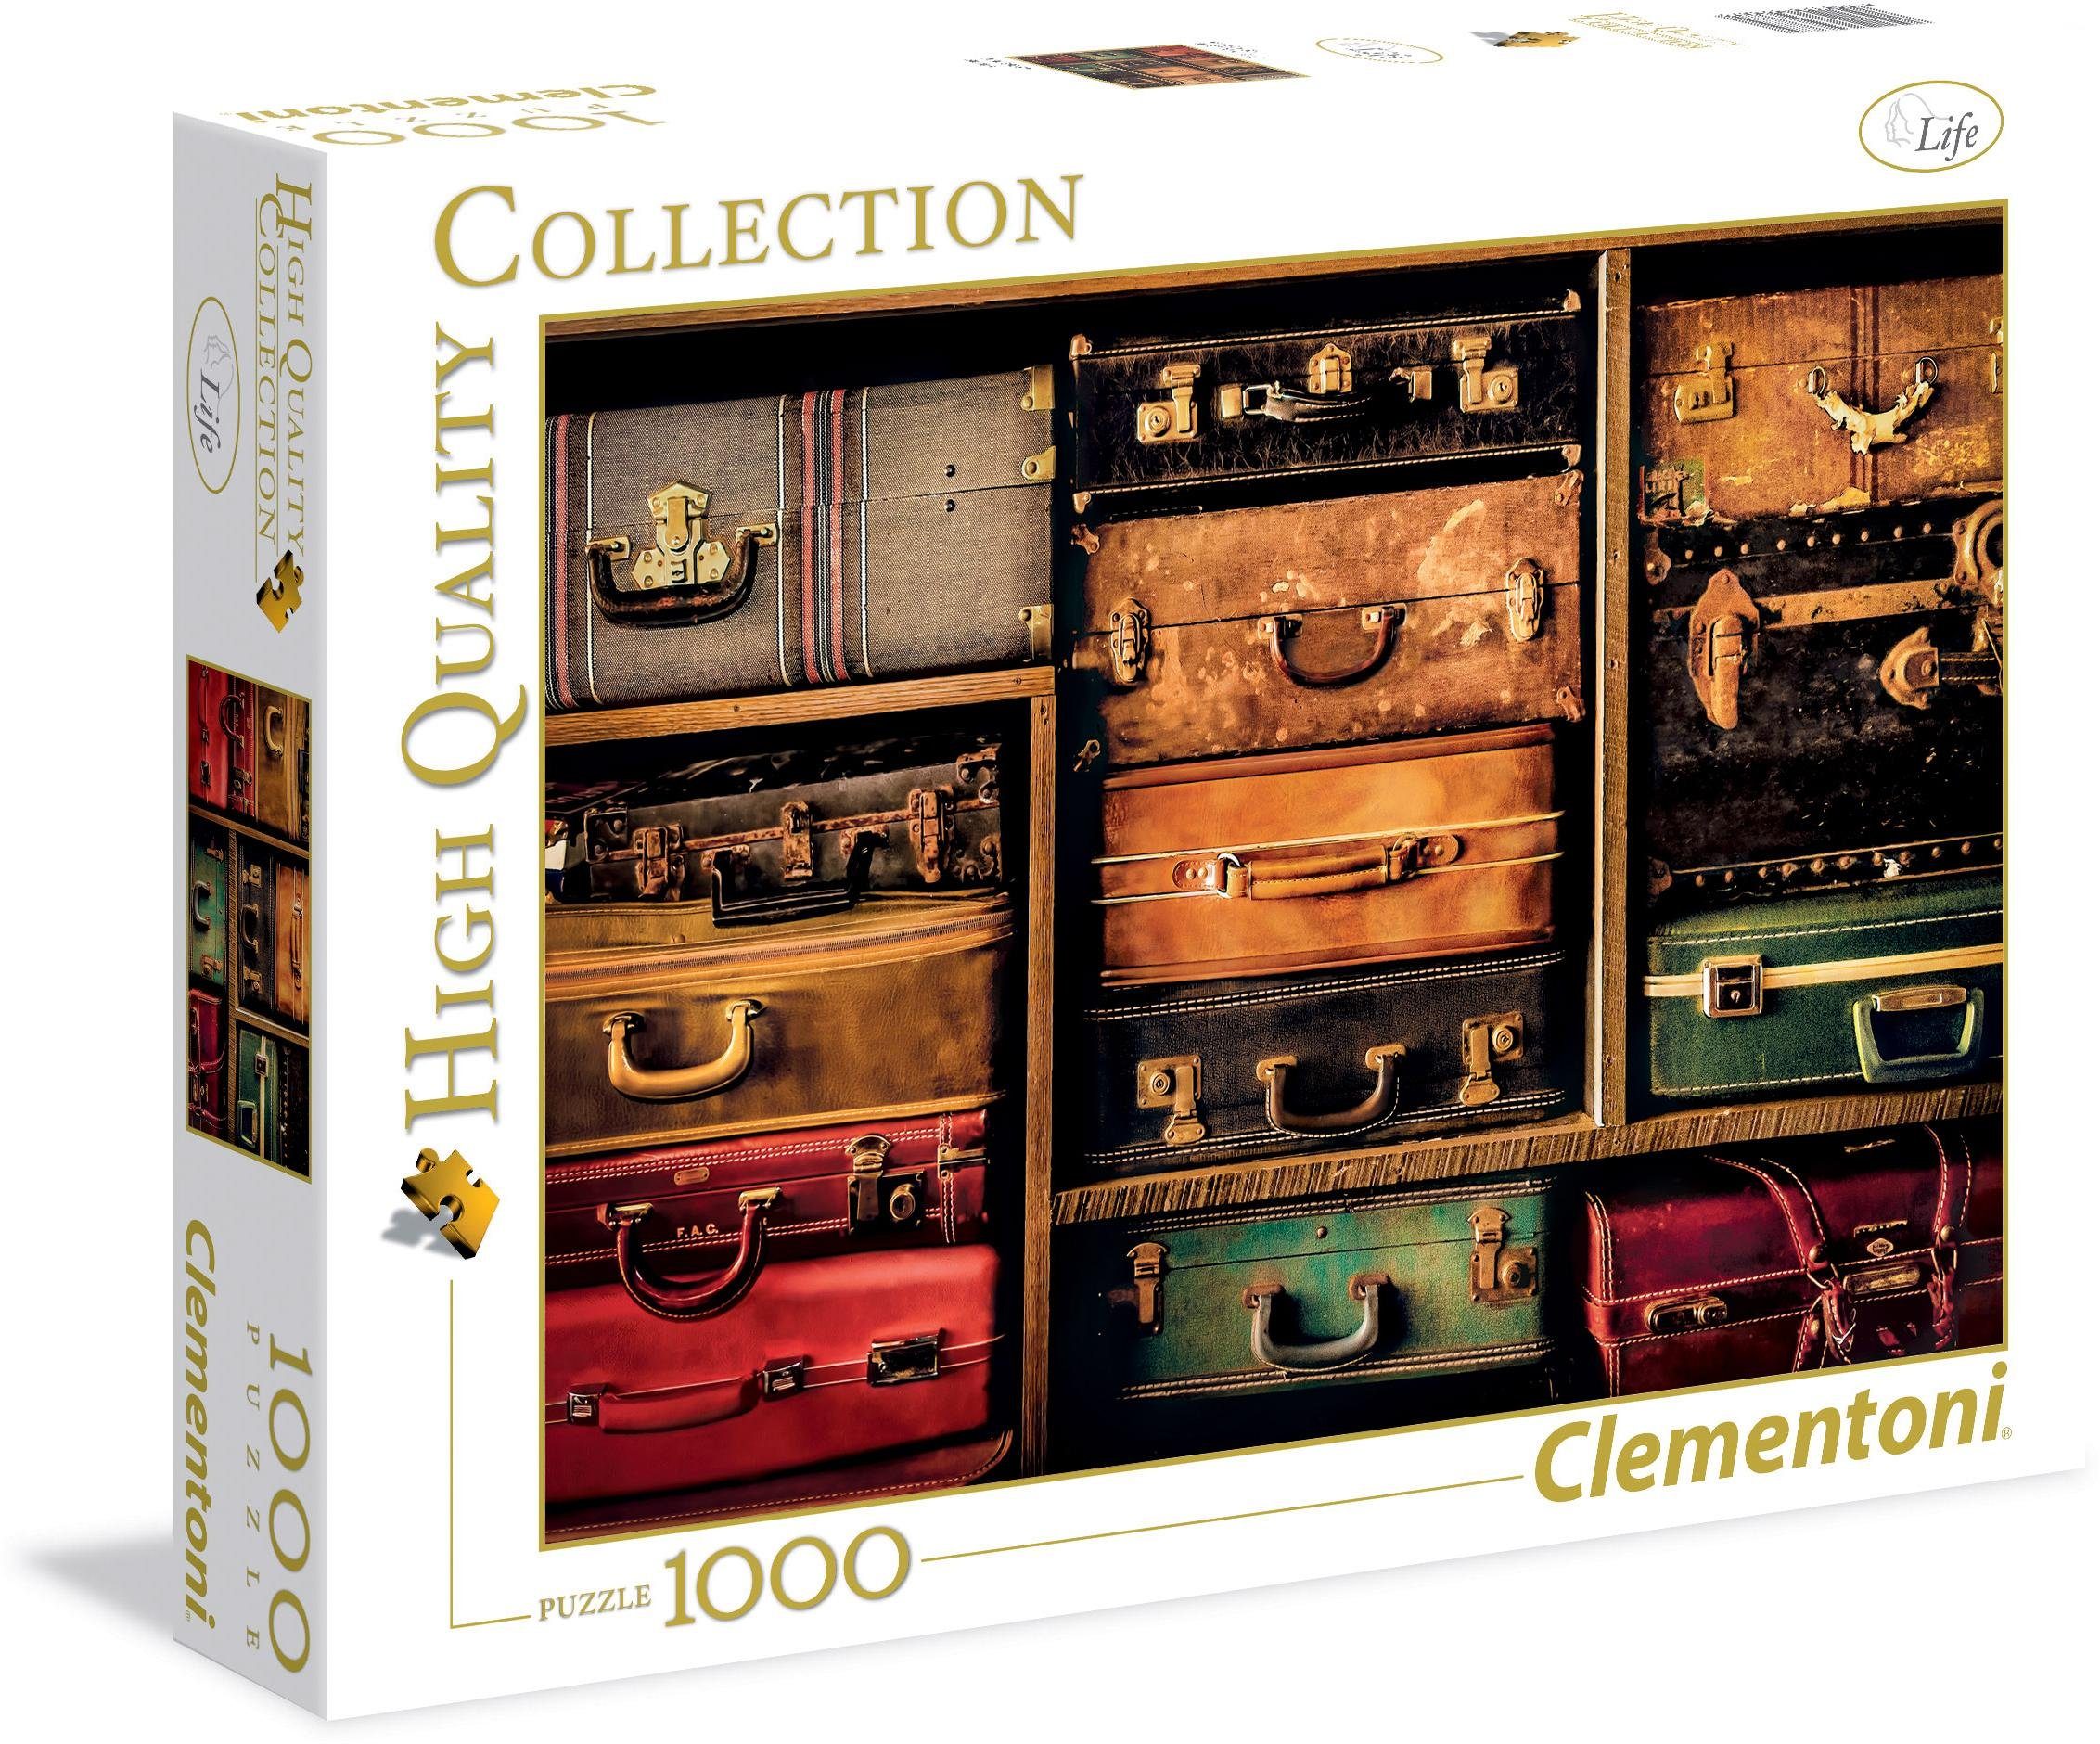 Clementoni® Puzzle »High Quality Collection - Reise«, 1000 Puzzleteile,  Made in Europe online kaufen | OTTO